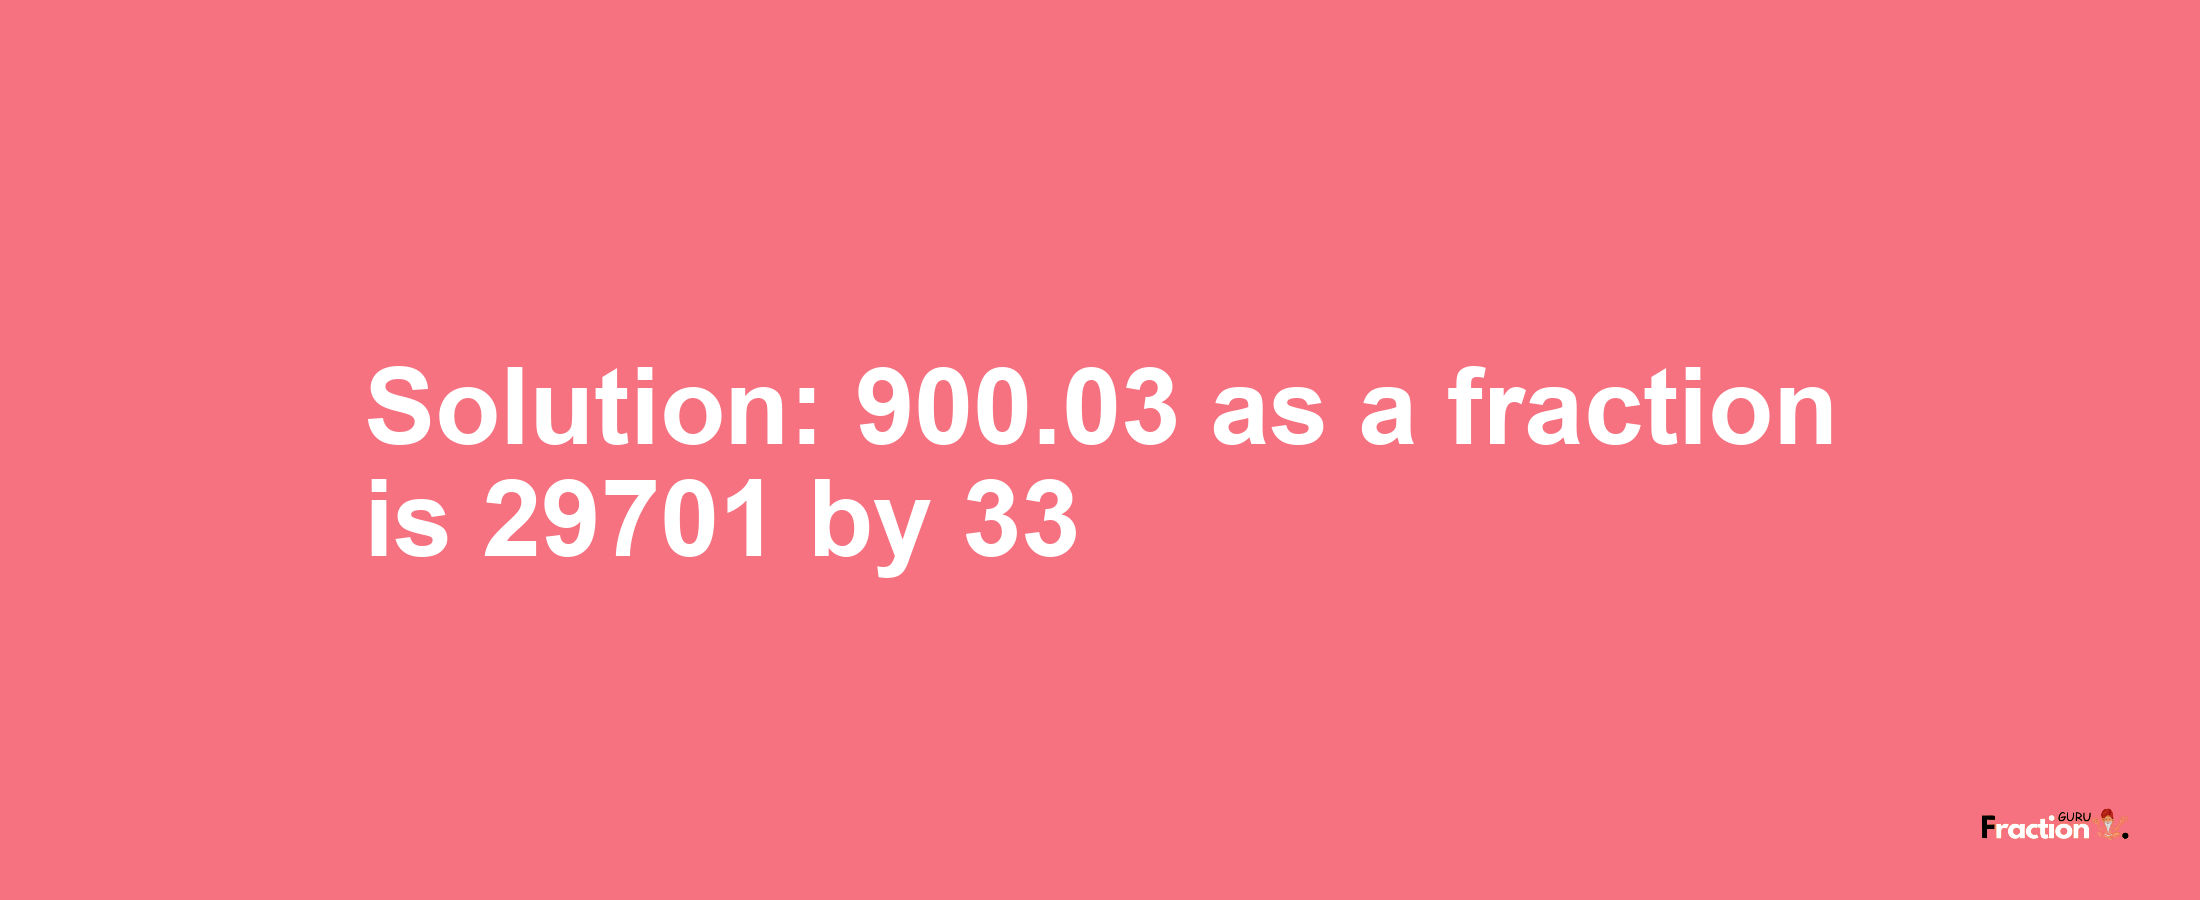 Solution:900.03 as a fraction is 29701/33